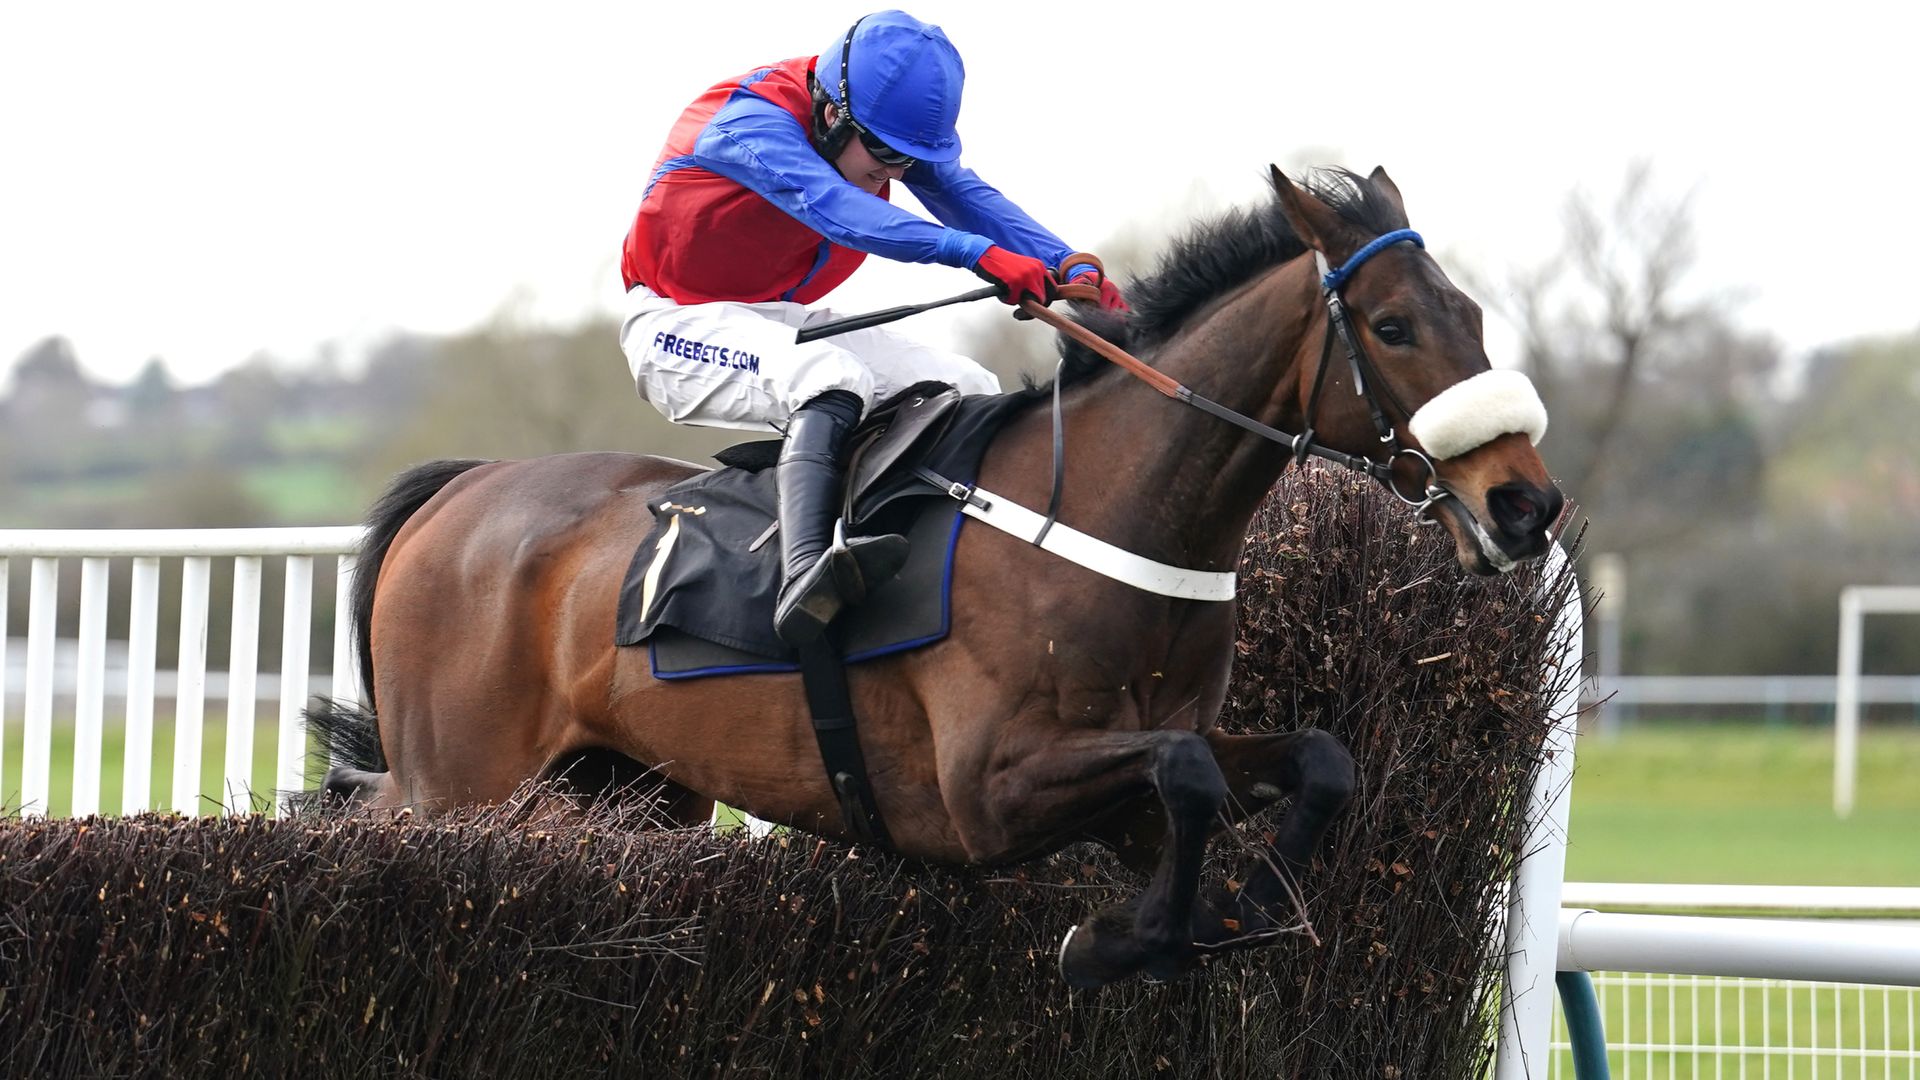 Today on Sky Sports Racing: Jumps action from Sedgefield